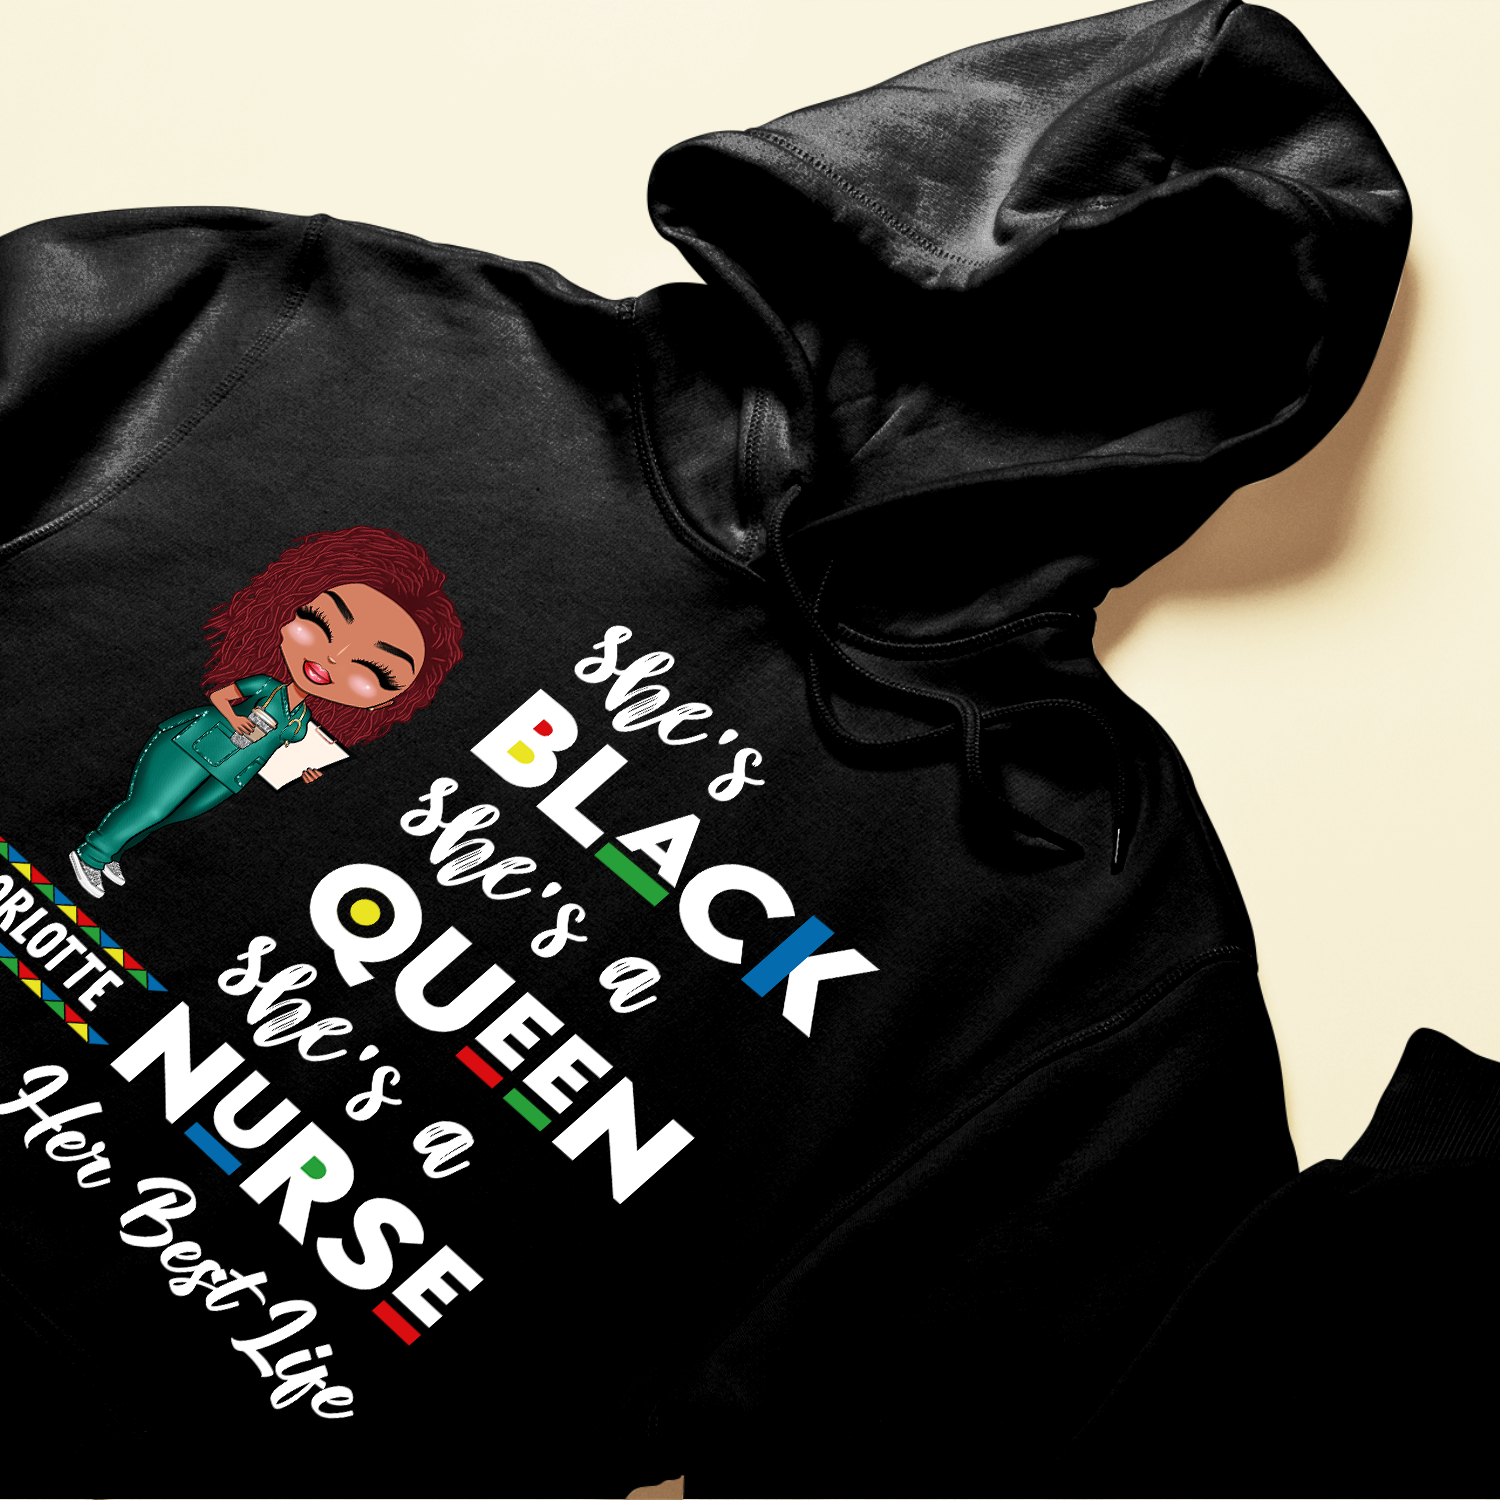 She's Black She's A Queen - Personalized Shirt - Gift For Nurse - Cartoon Nurse